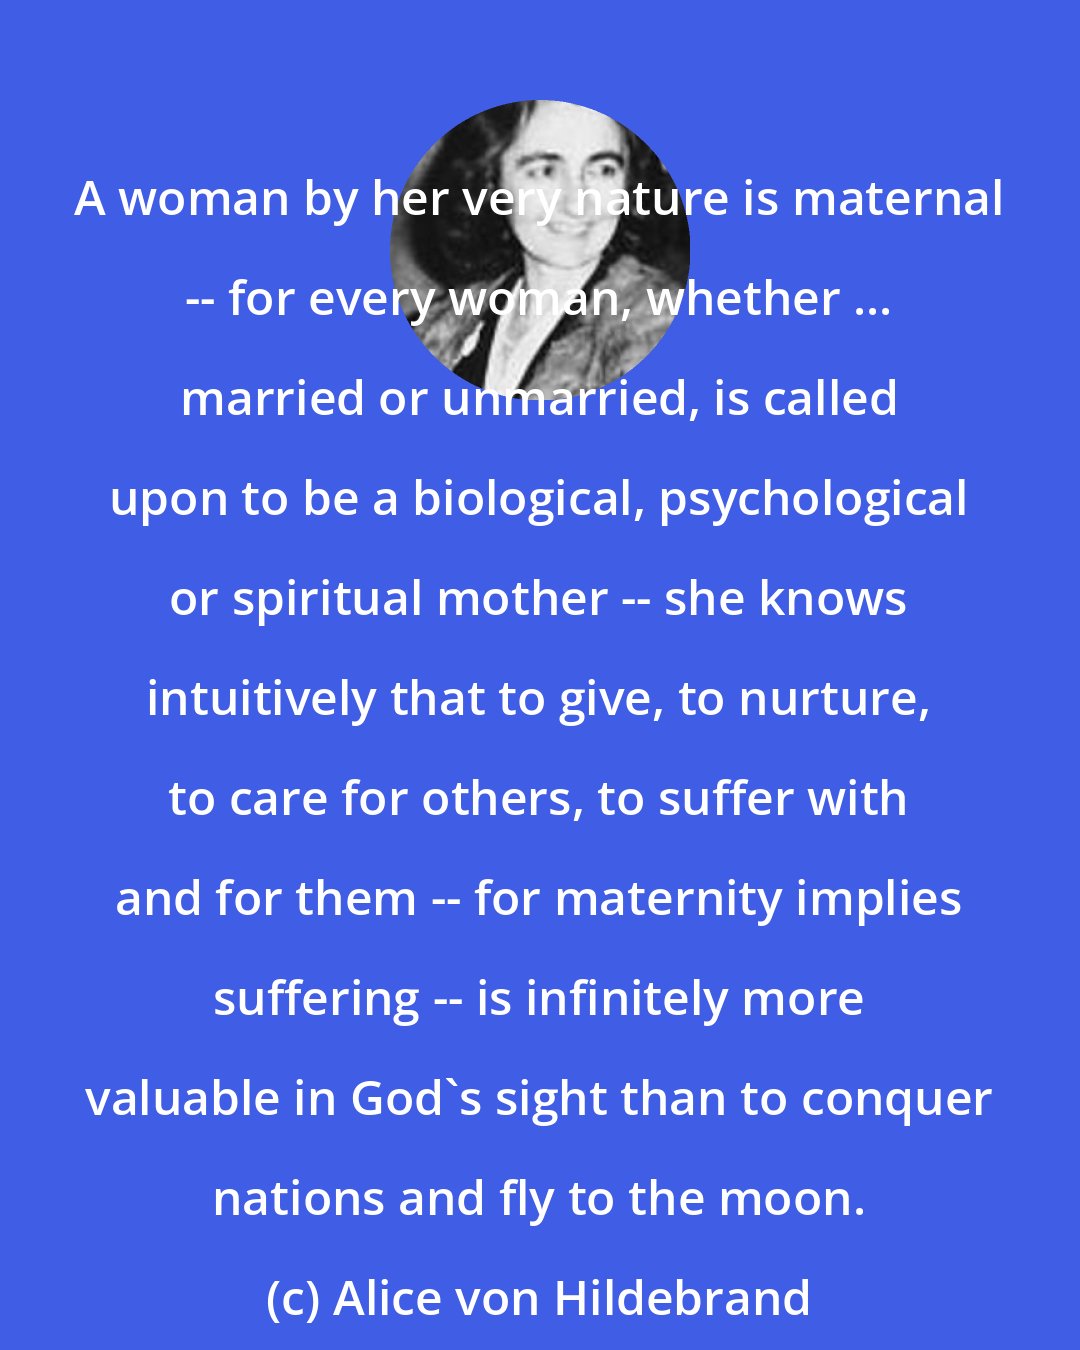 Alice von Hildebrand: A woman by her very nature is maternal -- for every woman, whether ... married or unmarried, is called upon to be a biological, psychological or spiritual mother -- she knows intuitively that to give, to nurture, to care for others, to suffer with and for them -- for maternity implies suffering -- is infinitely more valuable in God's sight than to conquer nations and fly to the moon.